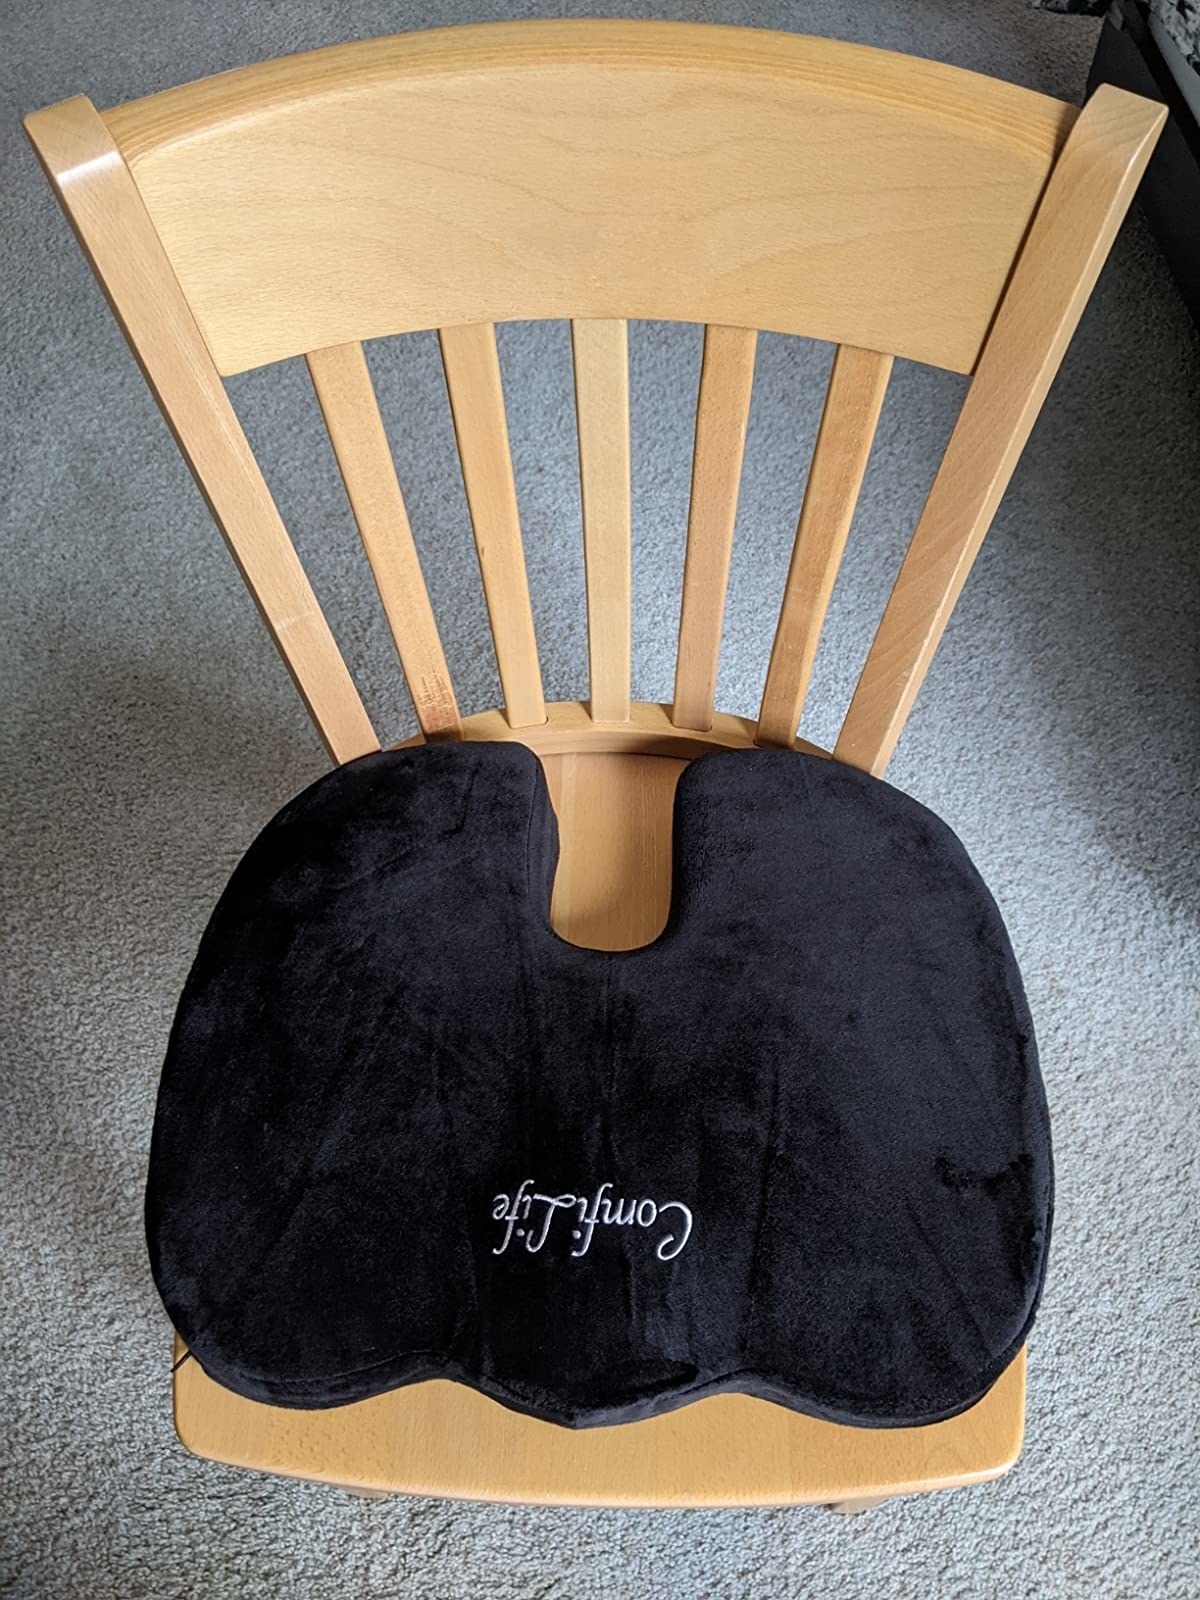 reviewer image of the black seat cushion on a wooden chair